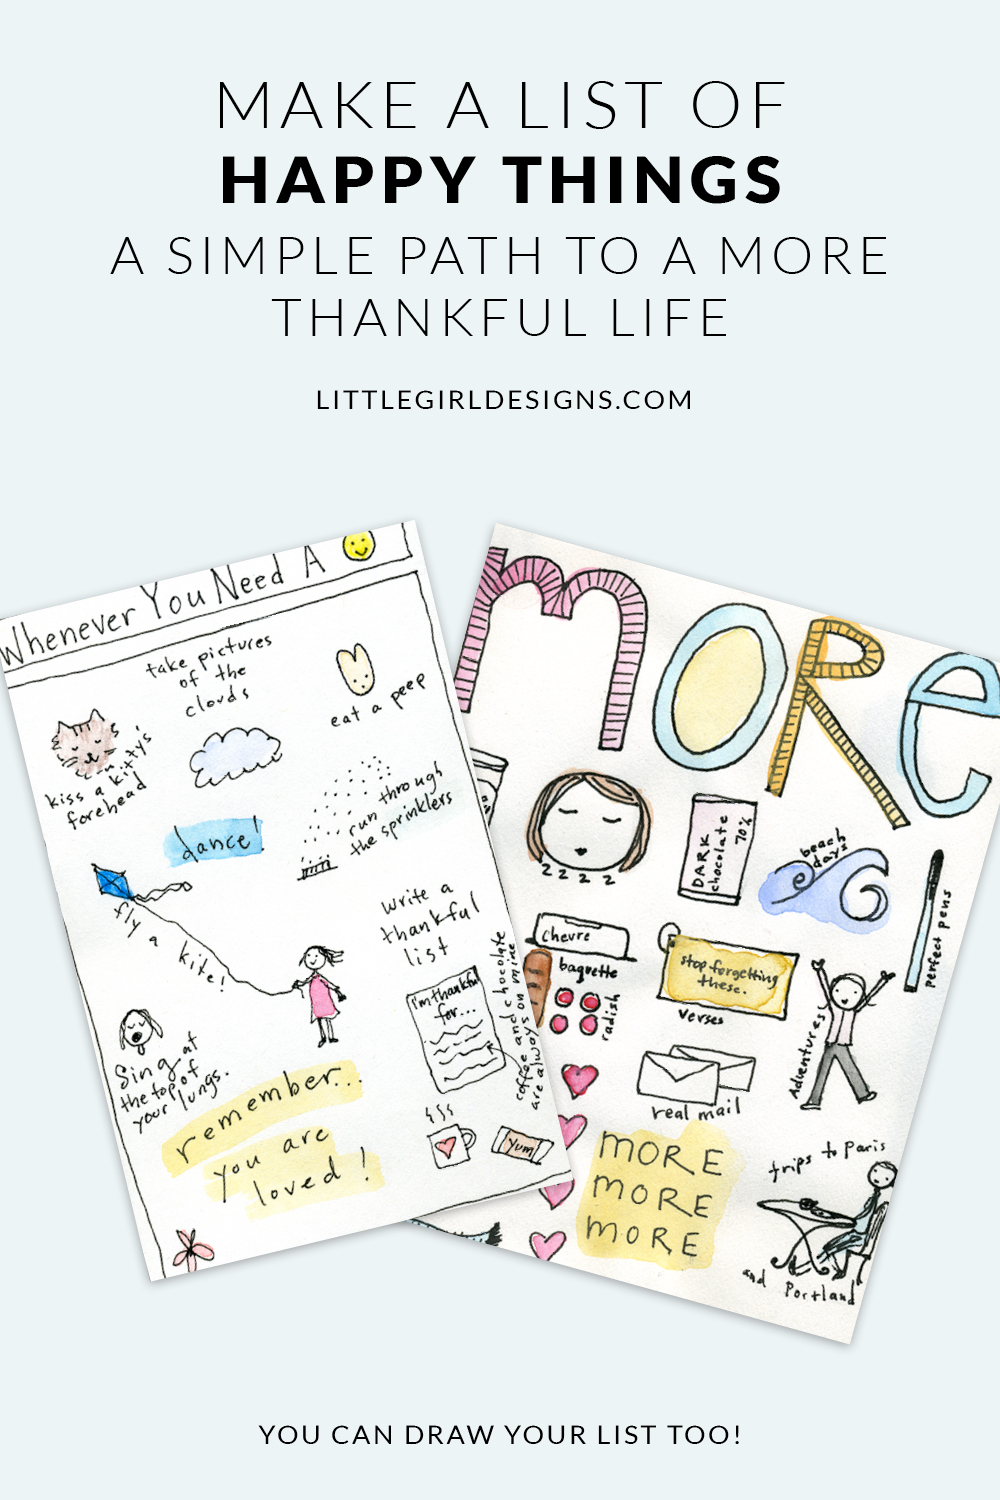 Make a List of Happy Things - a Simple Path to a More Thankful Life. When we reflect on the joys in our lives, even if they are seemingly small, we build up our thankful muscles little by little. Learn more @ littlegirldesigns.com